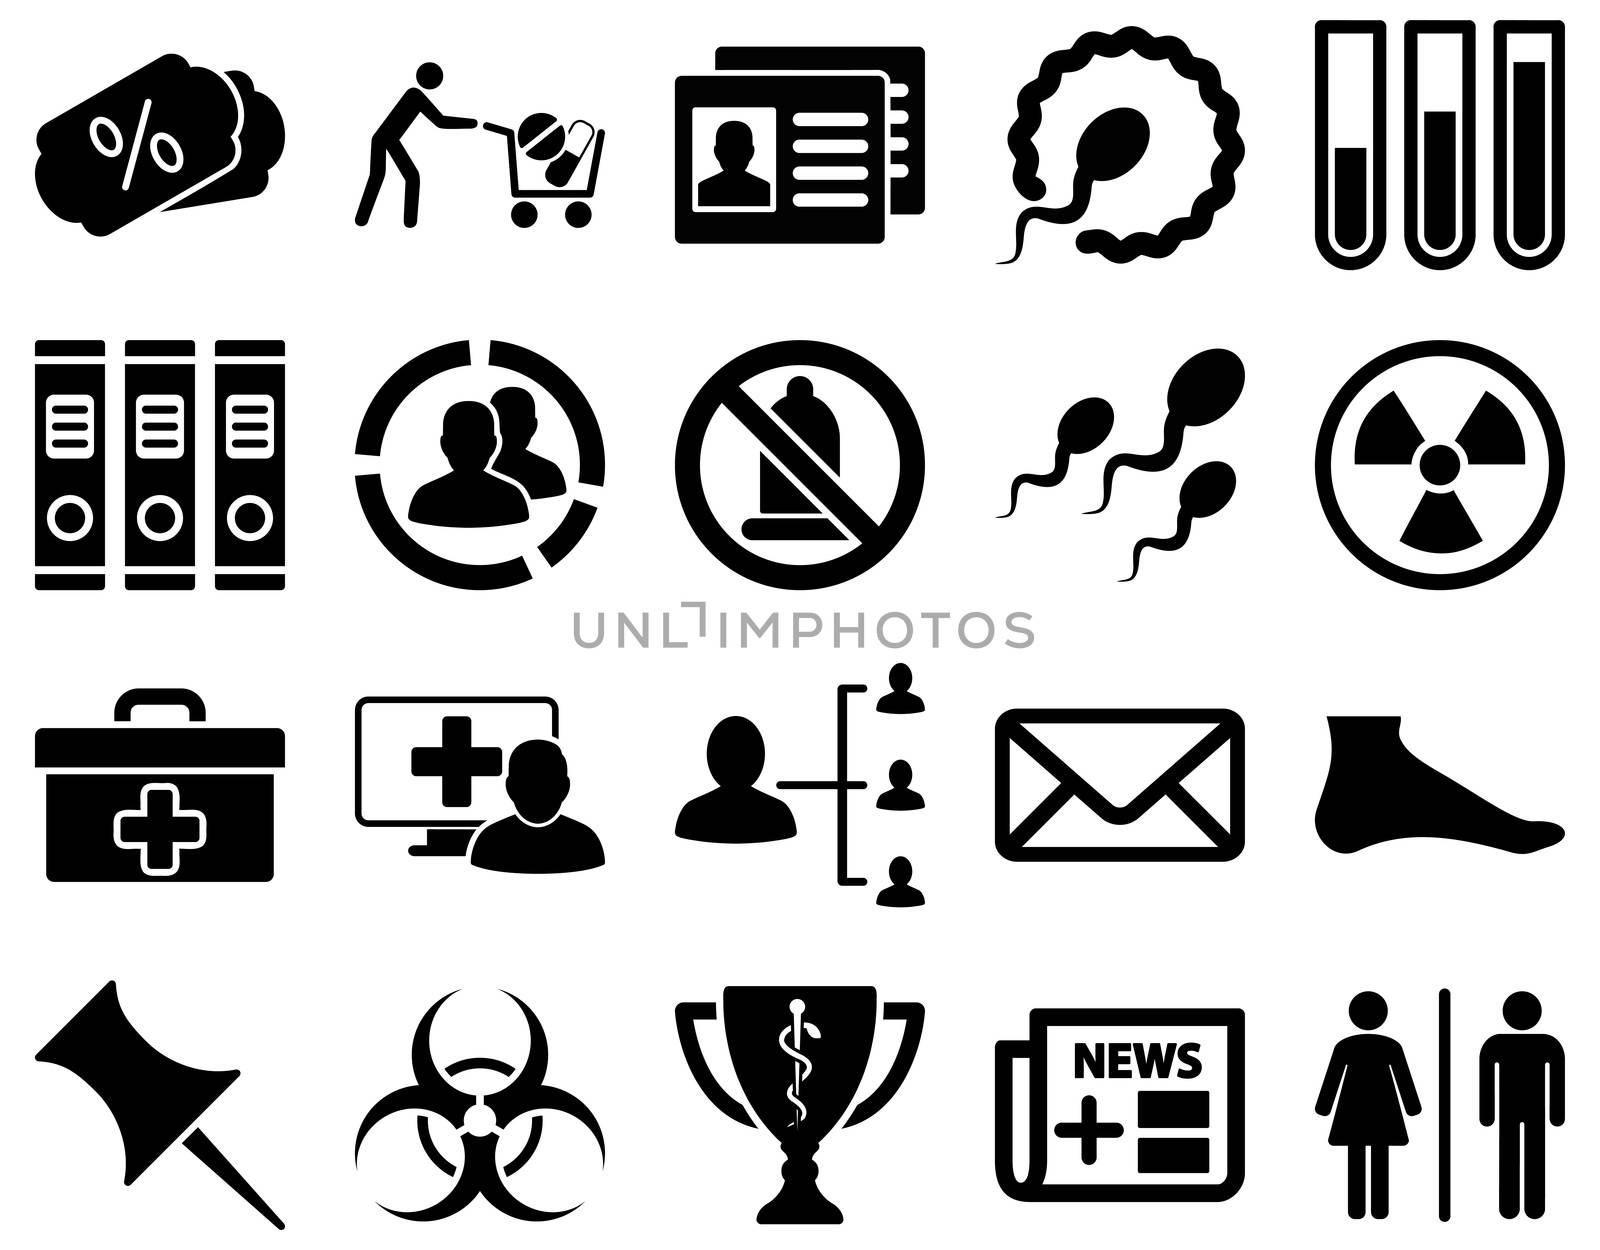 Medical icon set. Style: icons drawn with black color on a white background.